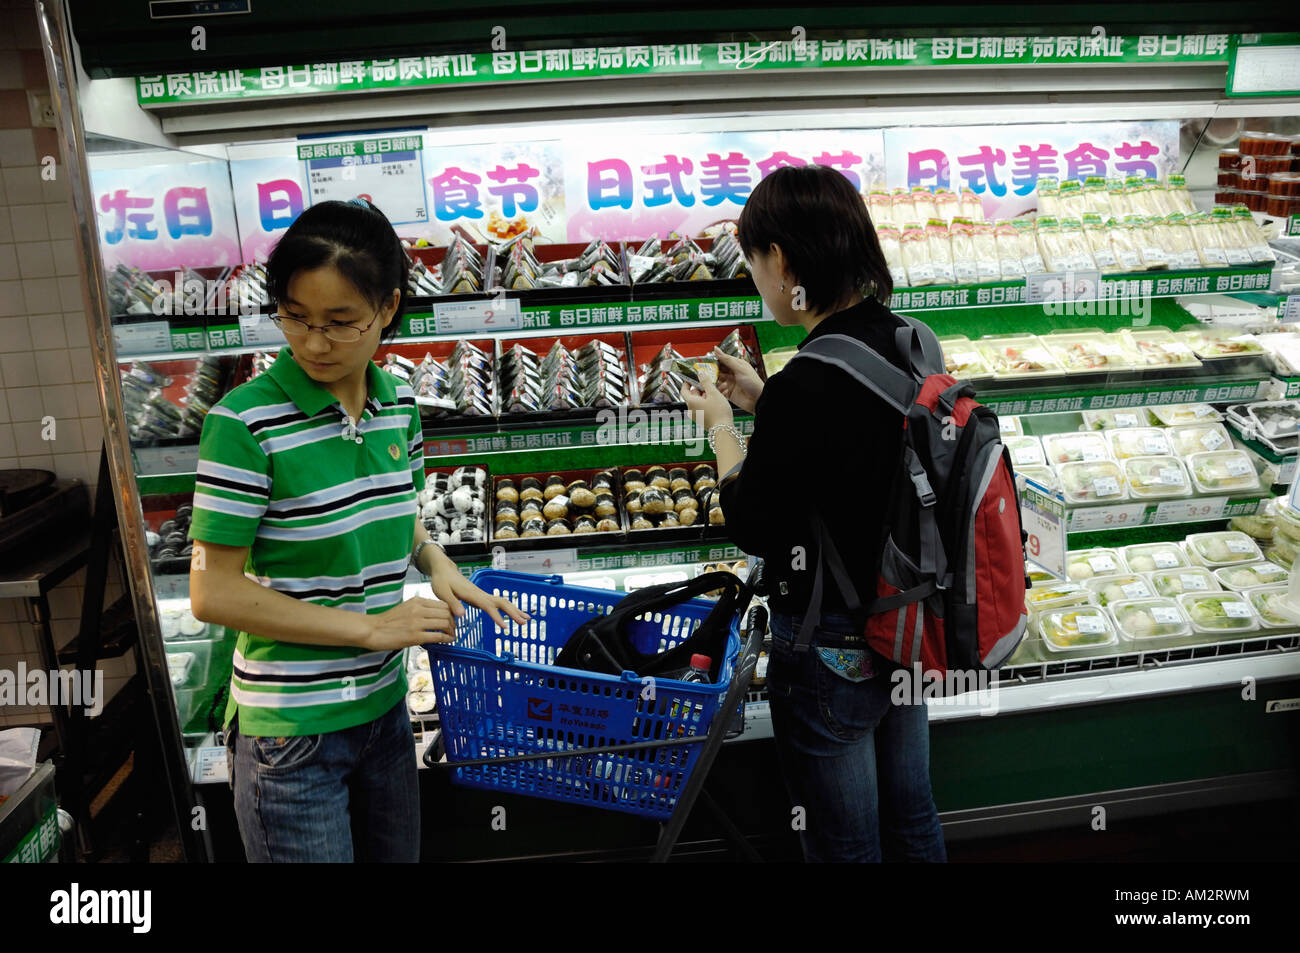 Chinese Consumers Check Japaness Food Products In A Supermarket Of AM2RWM 